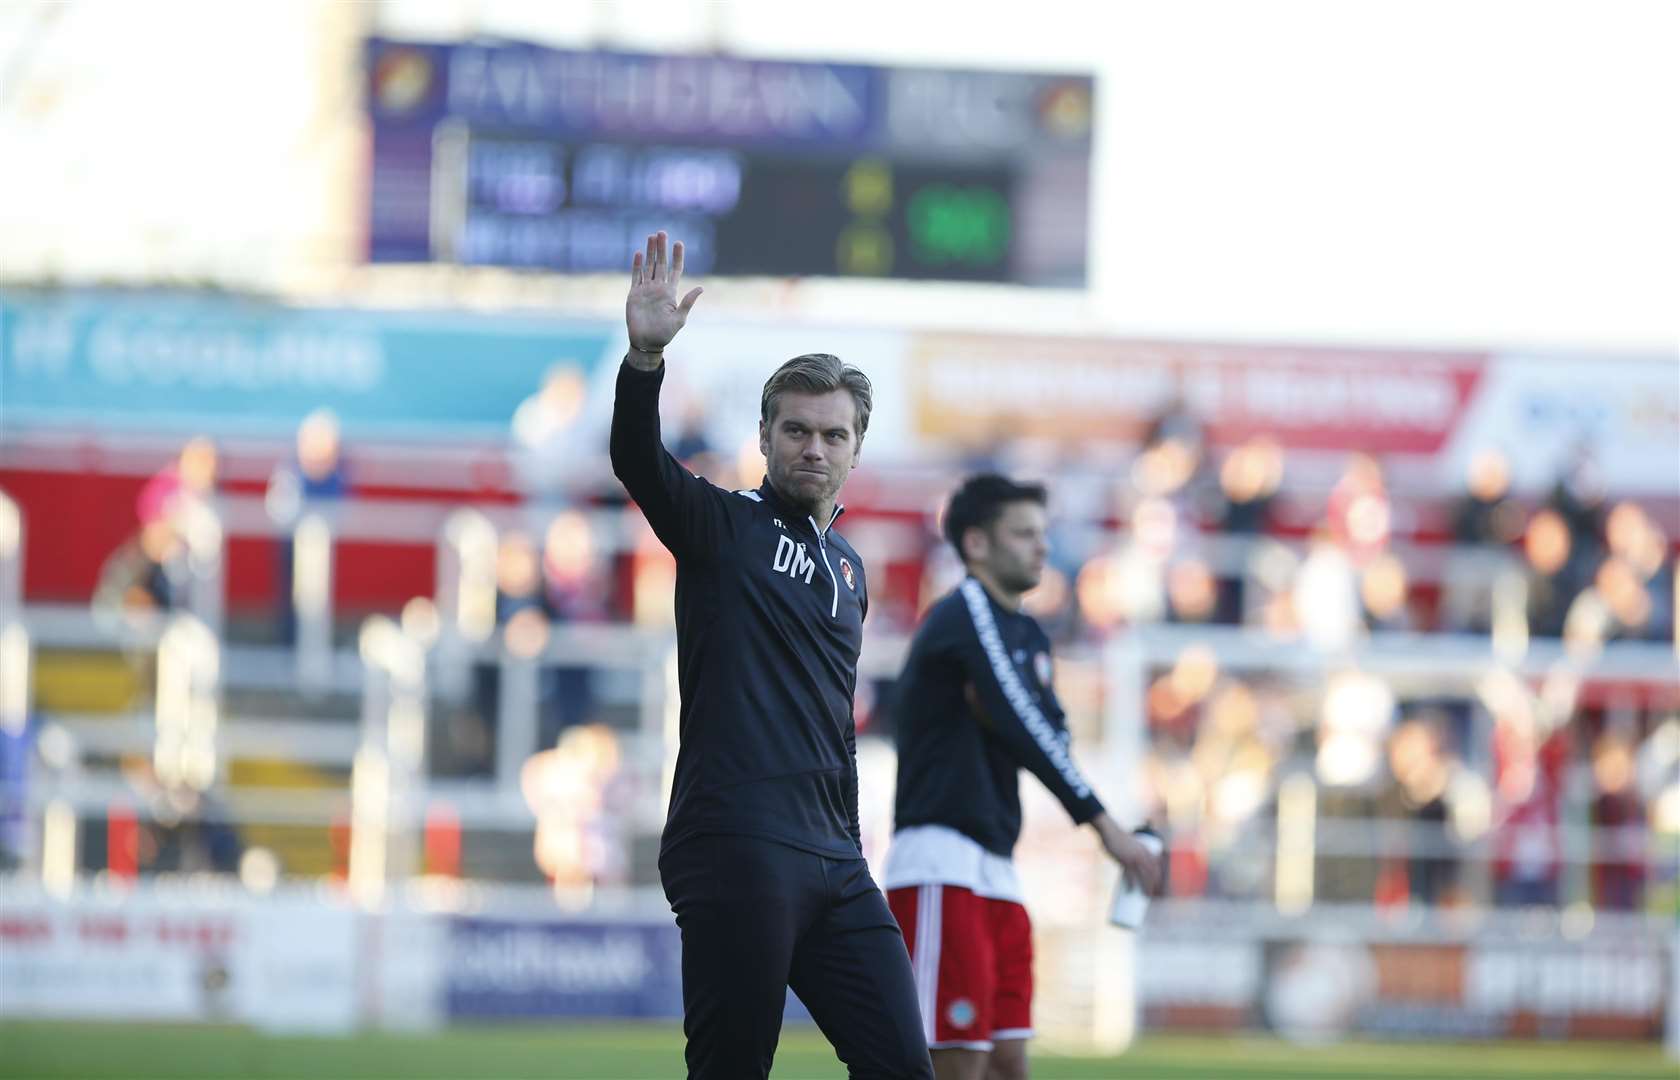 Daryl McMahon waves to the Ebbsfleet supporters Picture: Andy Jones